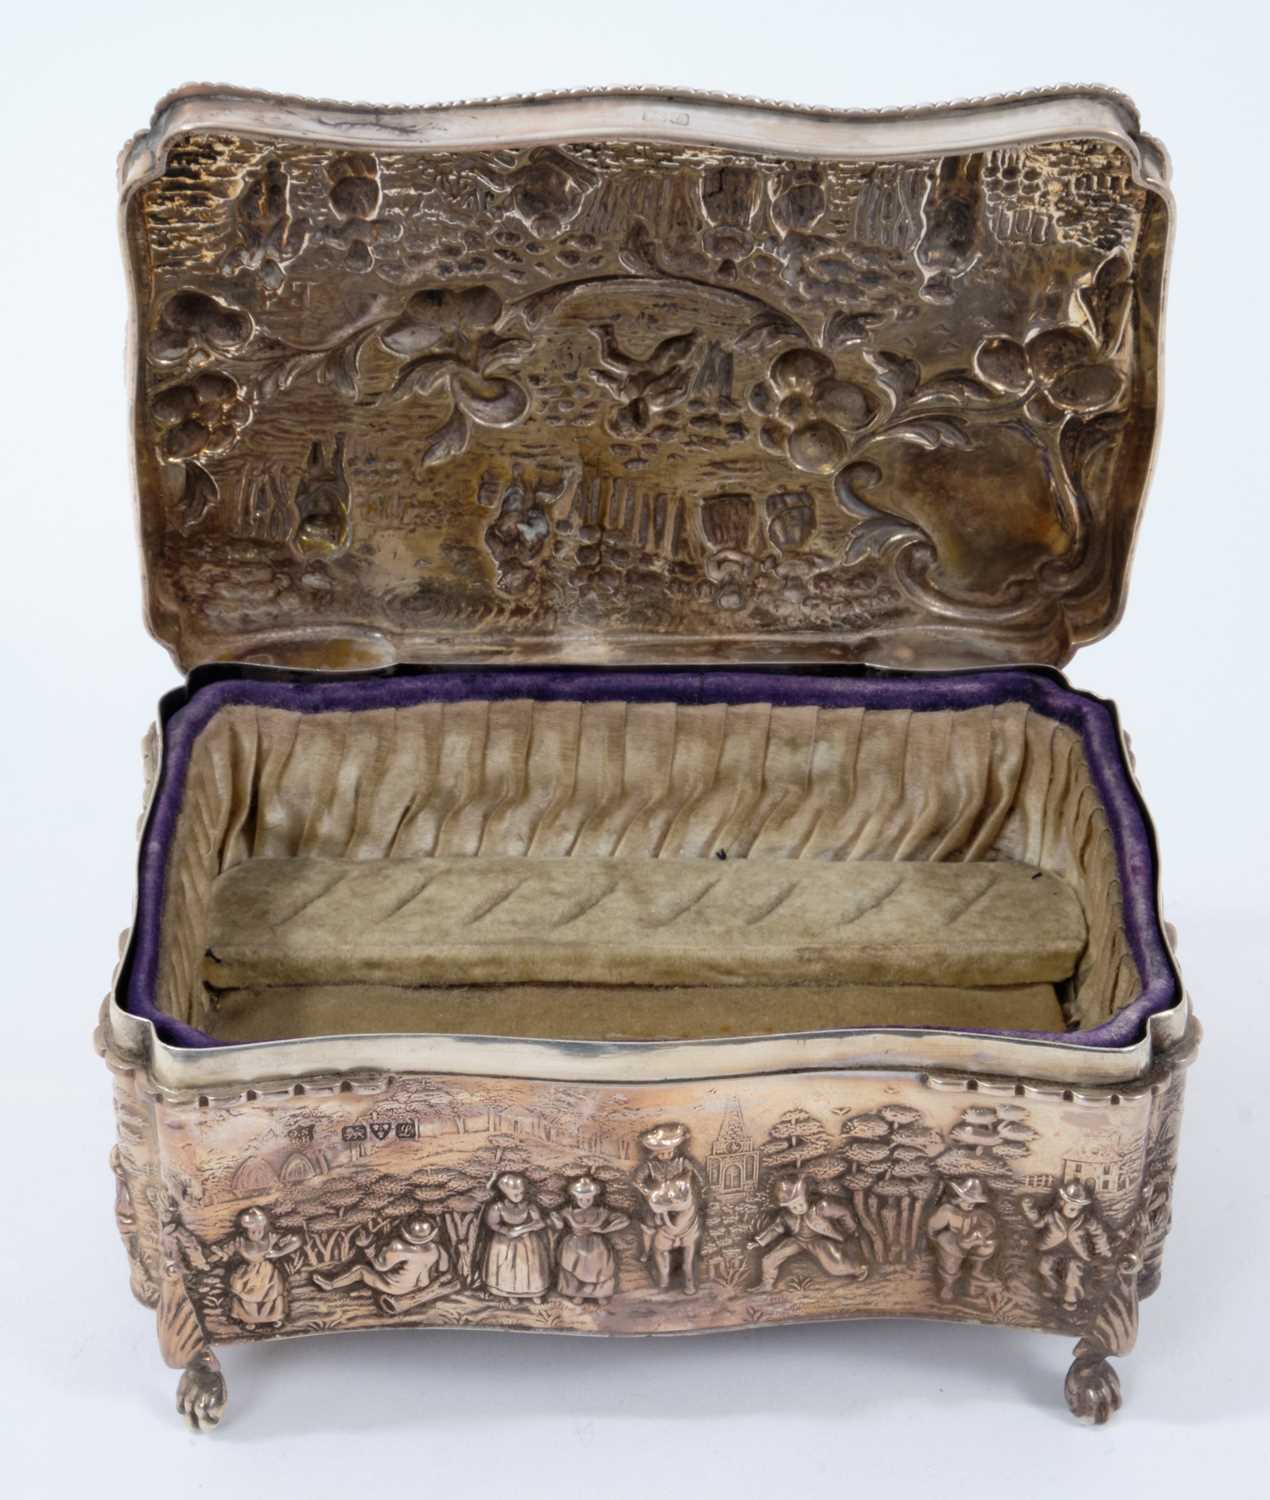 Early George V silver jewellery casket of shaped rectangular form - Image 2 of 2